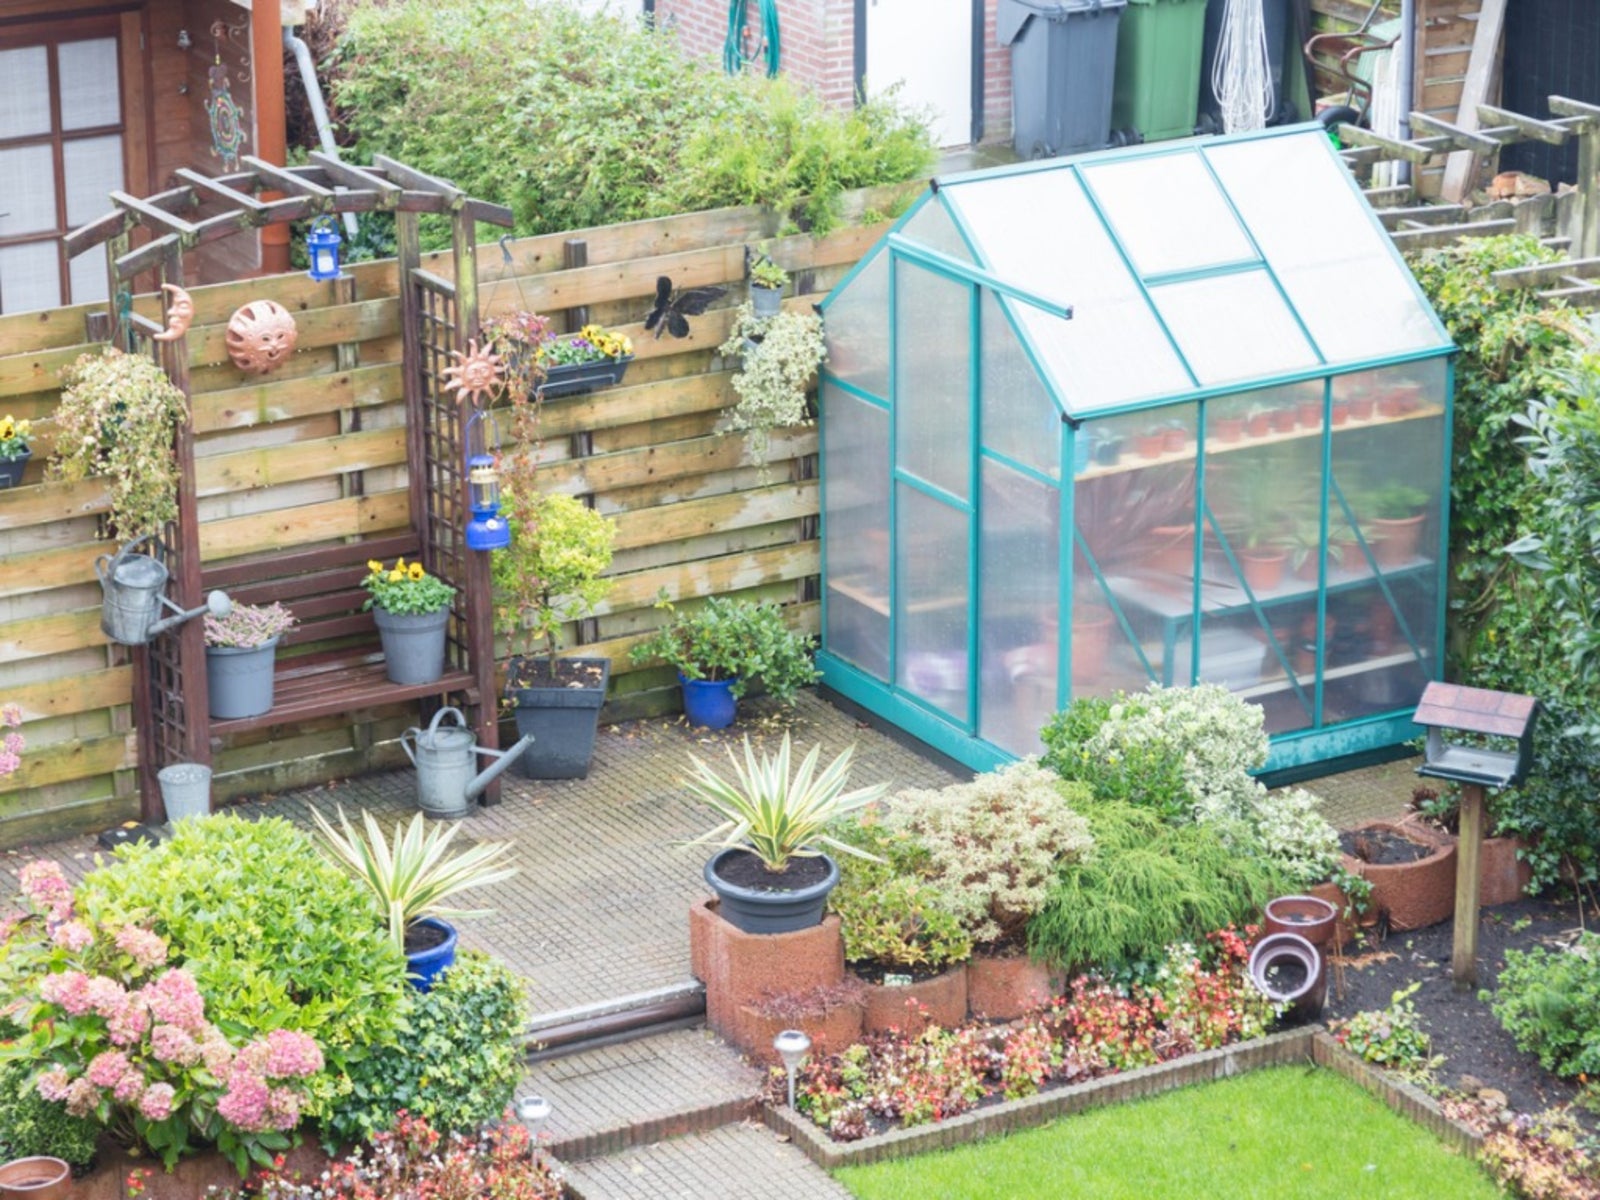 Mini Greenhouse Gardening How To Use, Shelving Ideas For Greenhouse